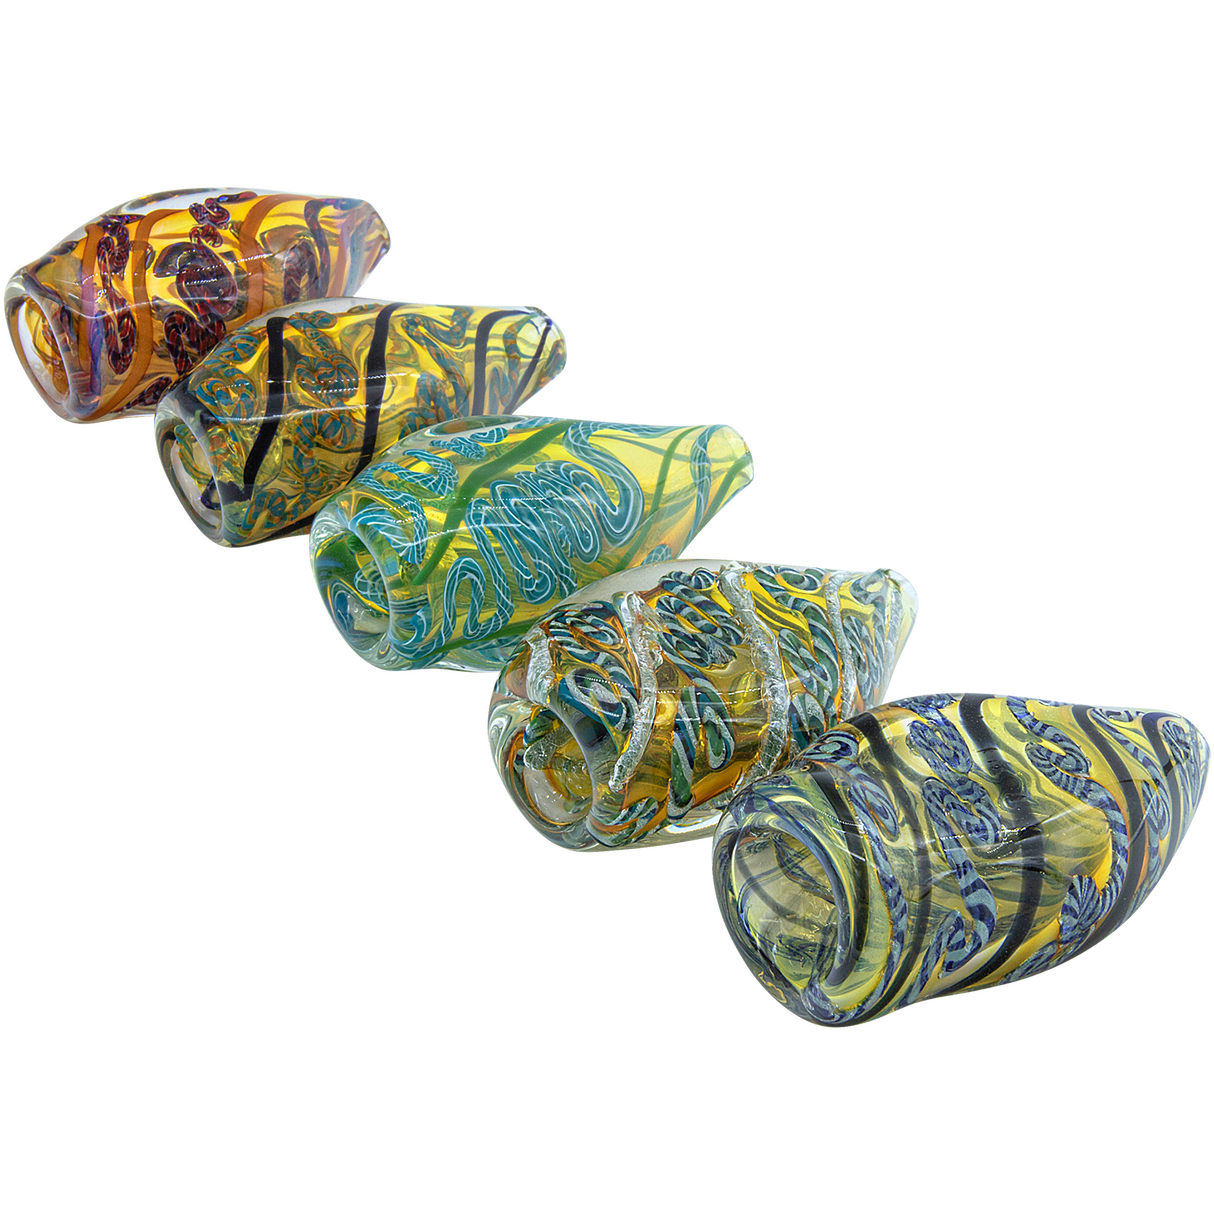 LA Pipes 'Skipping Stone' Inside-Out Chillum in various colors, 2.5-inch, for dry herbs